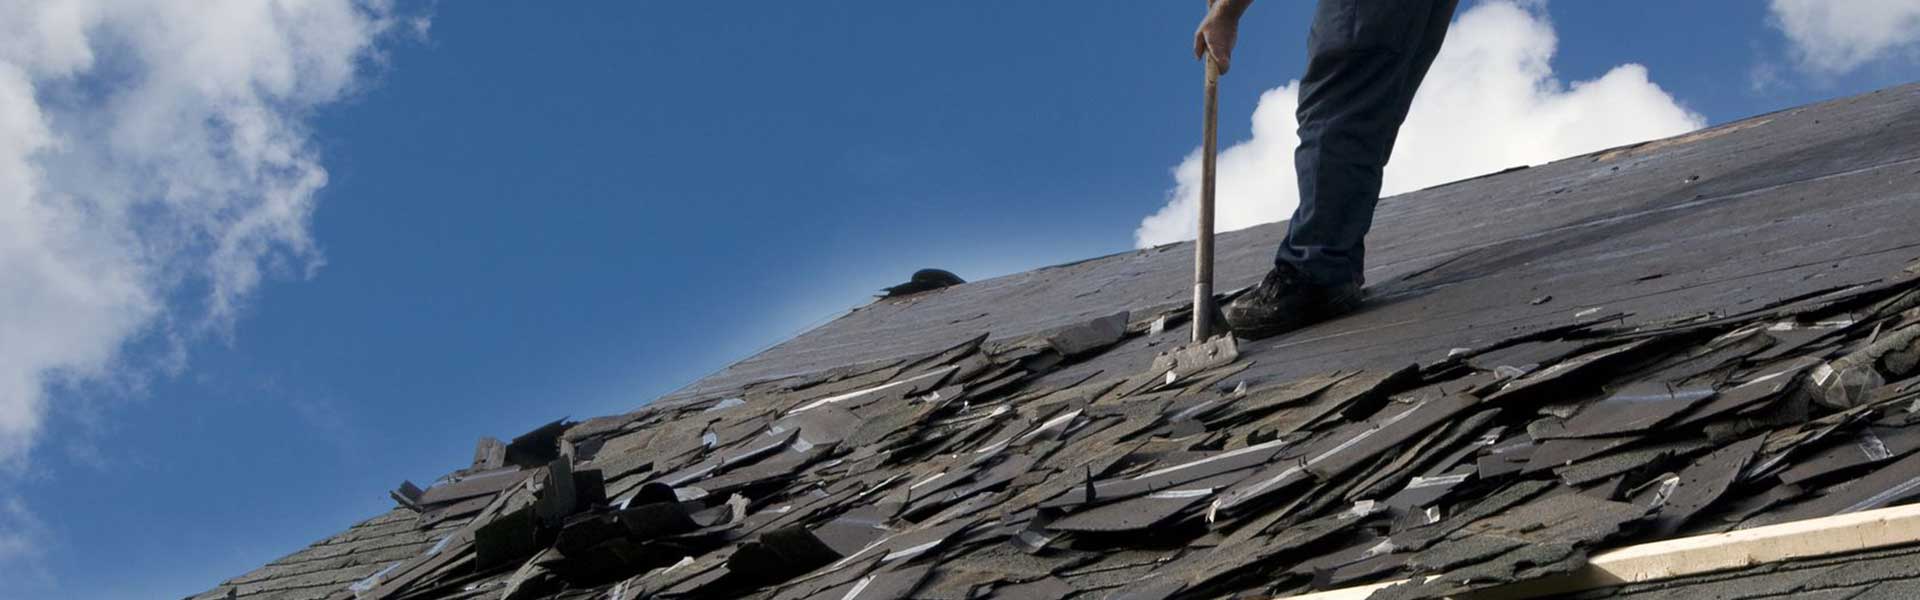 South Carolina Roofing Accidents Lawyer